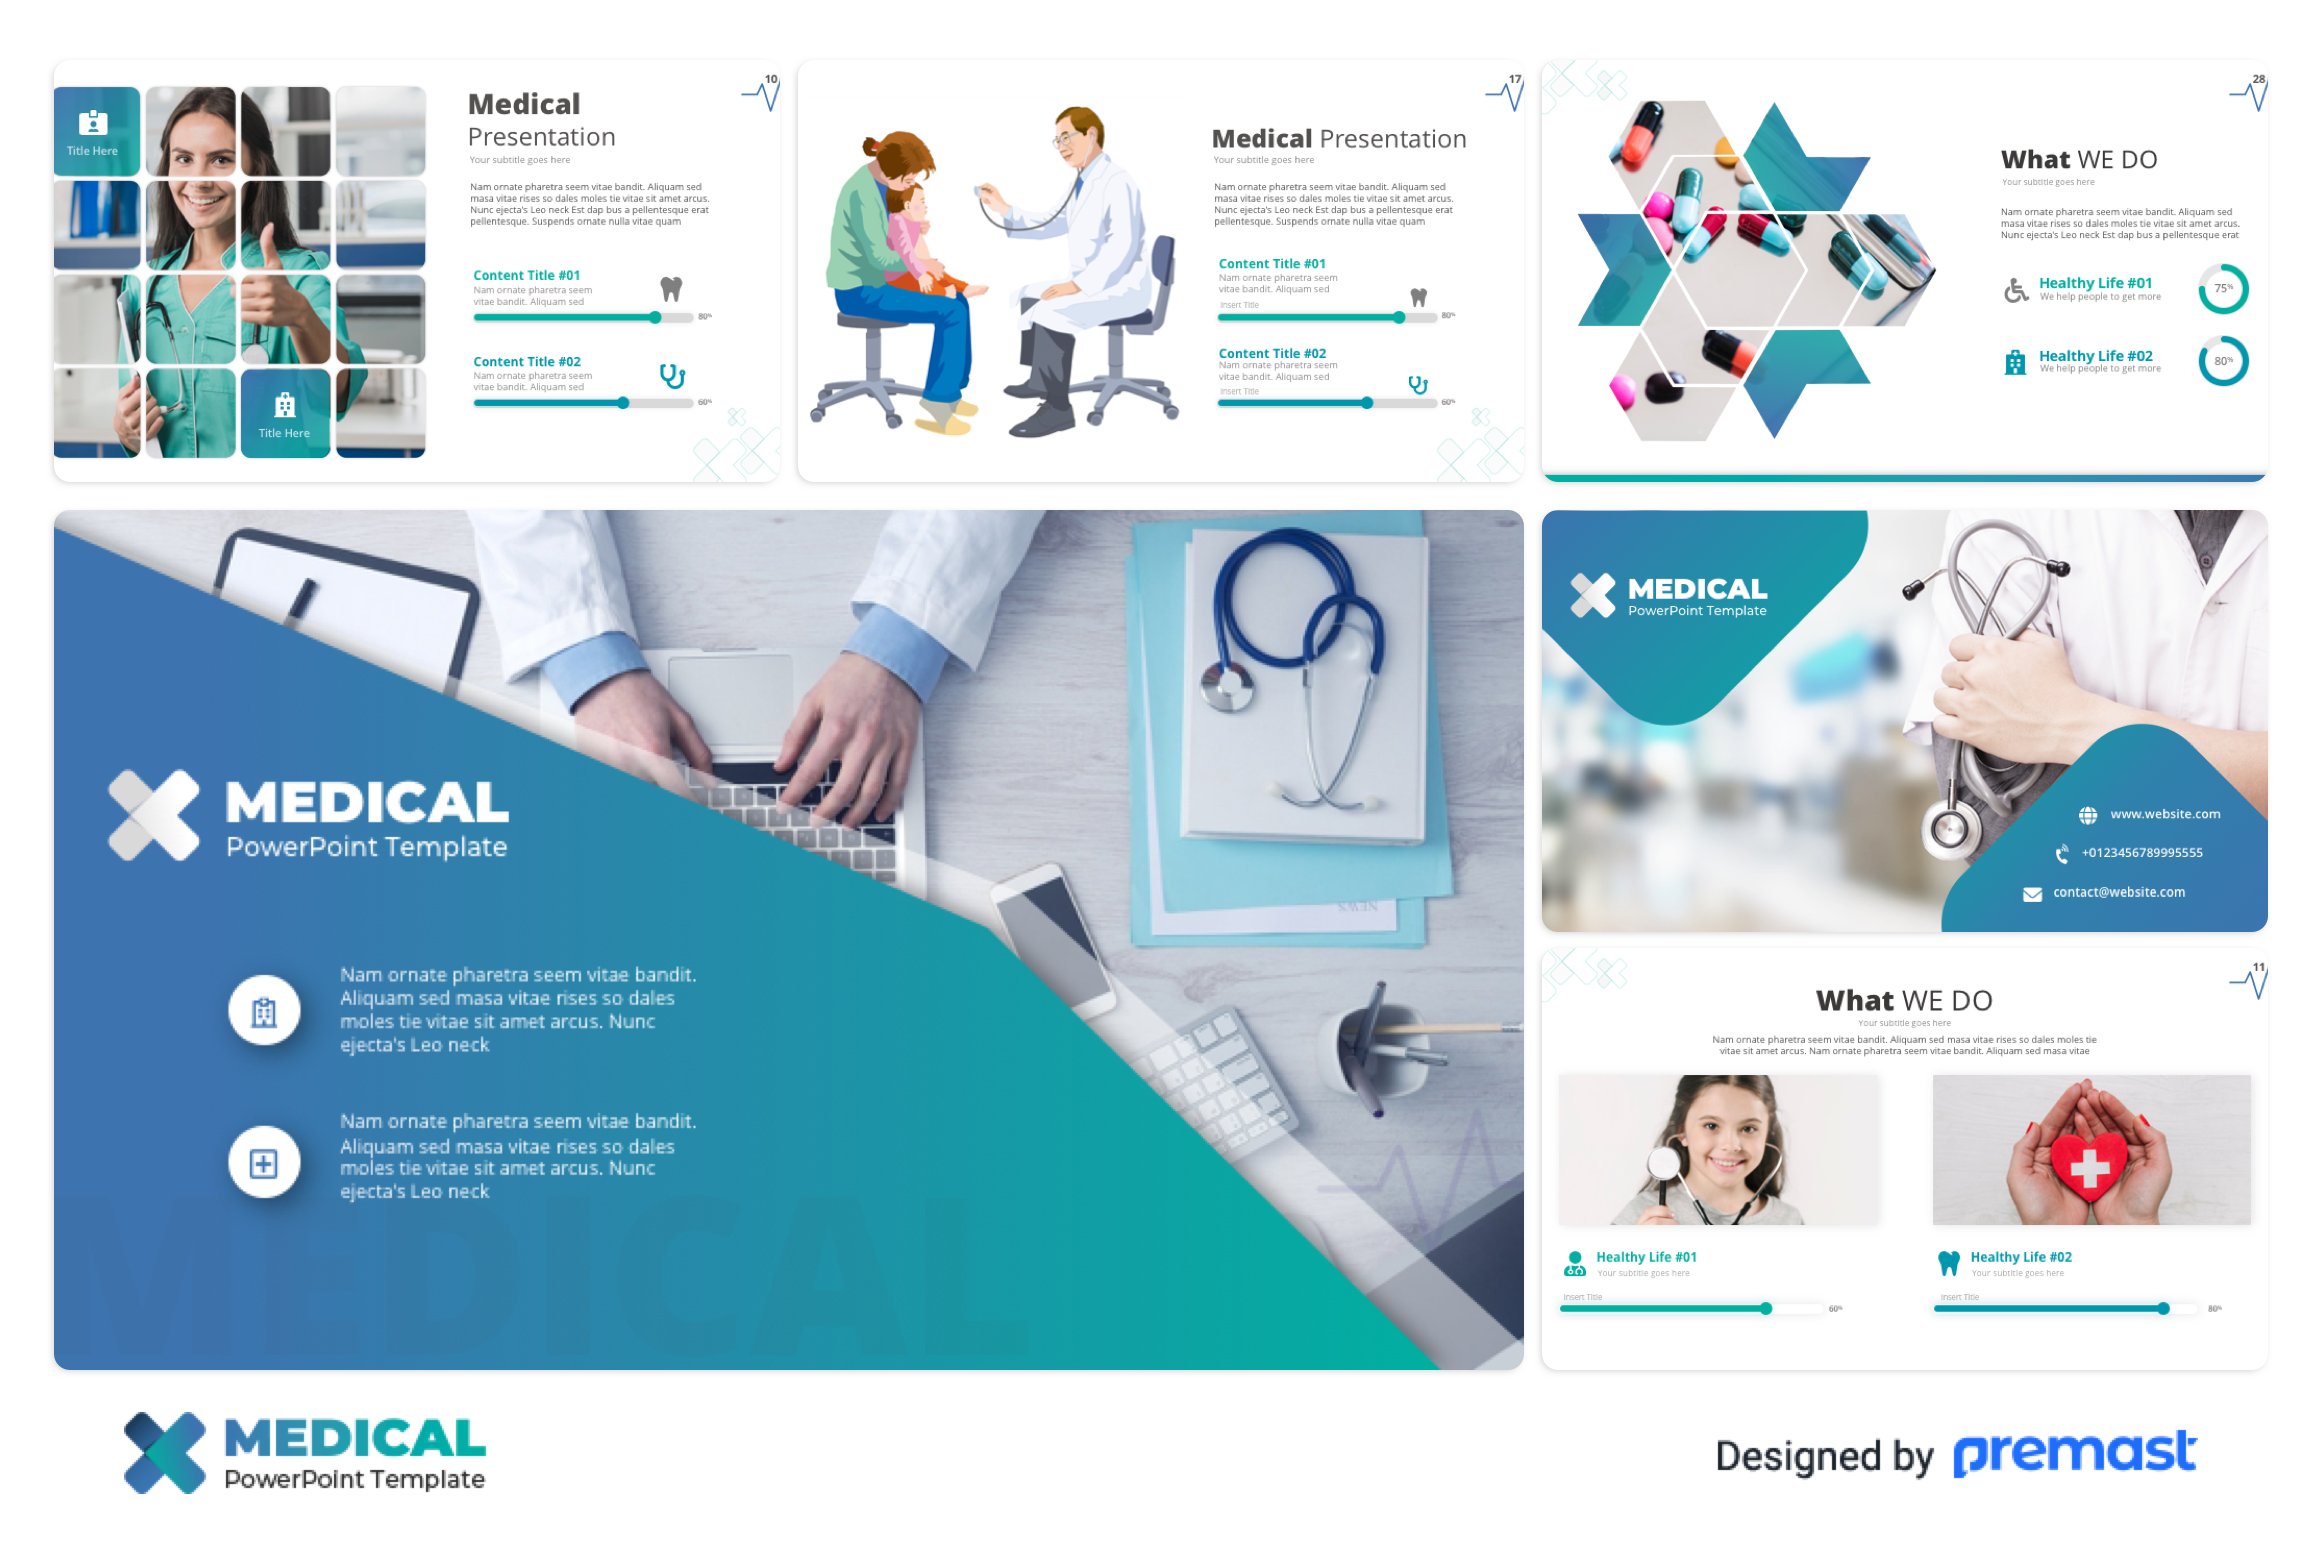 Medical Powerpoint is a mobile friendly template.